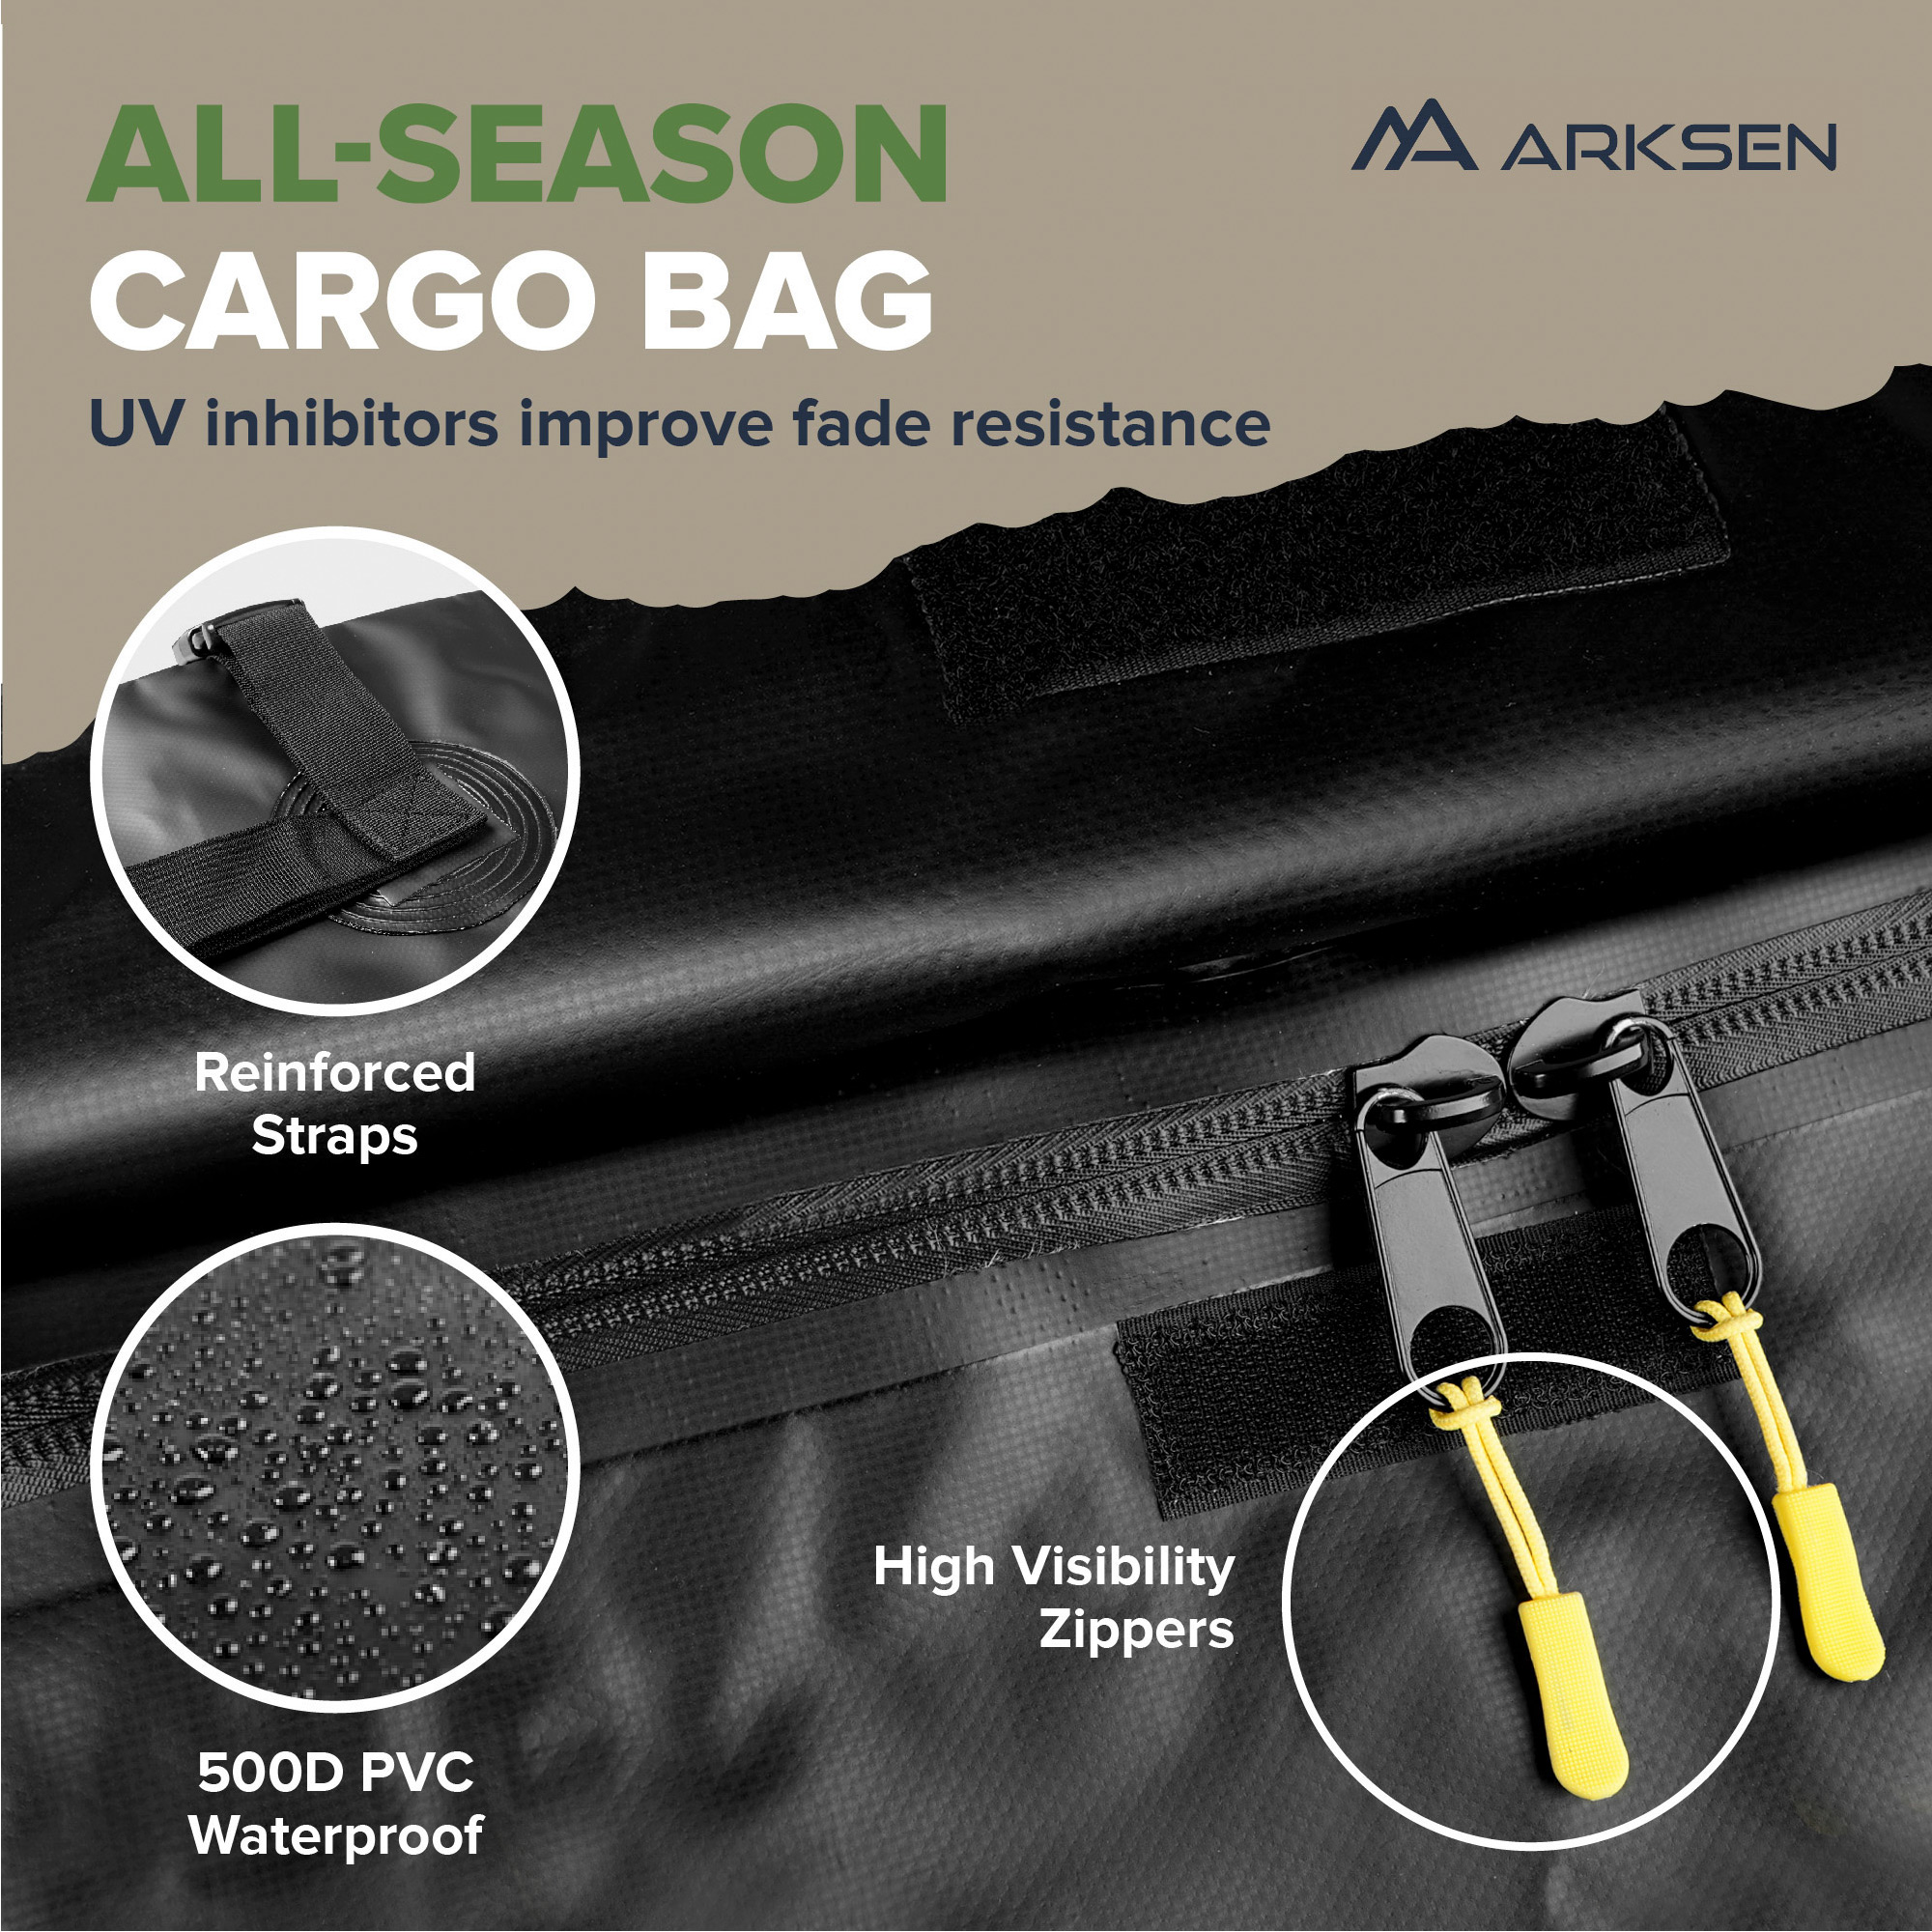 ARKSEN 60" x 20" x 6" Angled Shank Hitch Mount Cargo Carrier Luggage Basket Fit 2" Receiver, 500LBS Capacity, With Updated 500D PVC Waterproof Cargo Bag with Reinforced Straps, Black - image 4 of 6